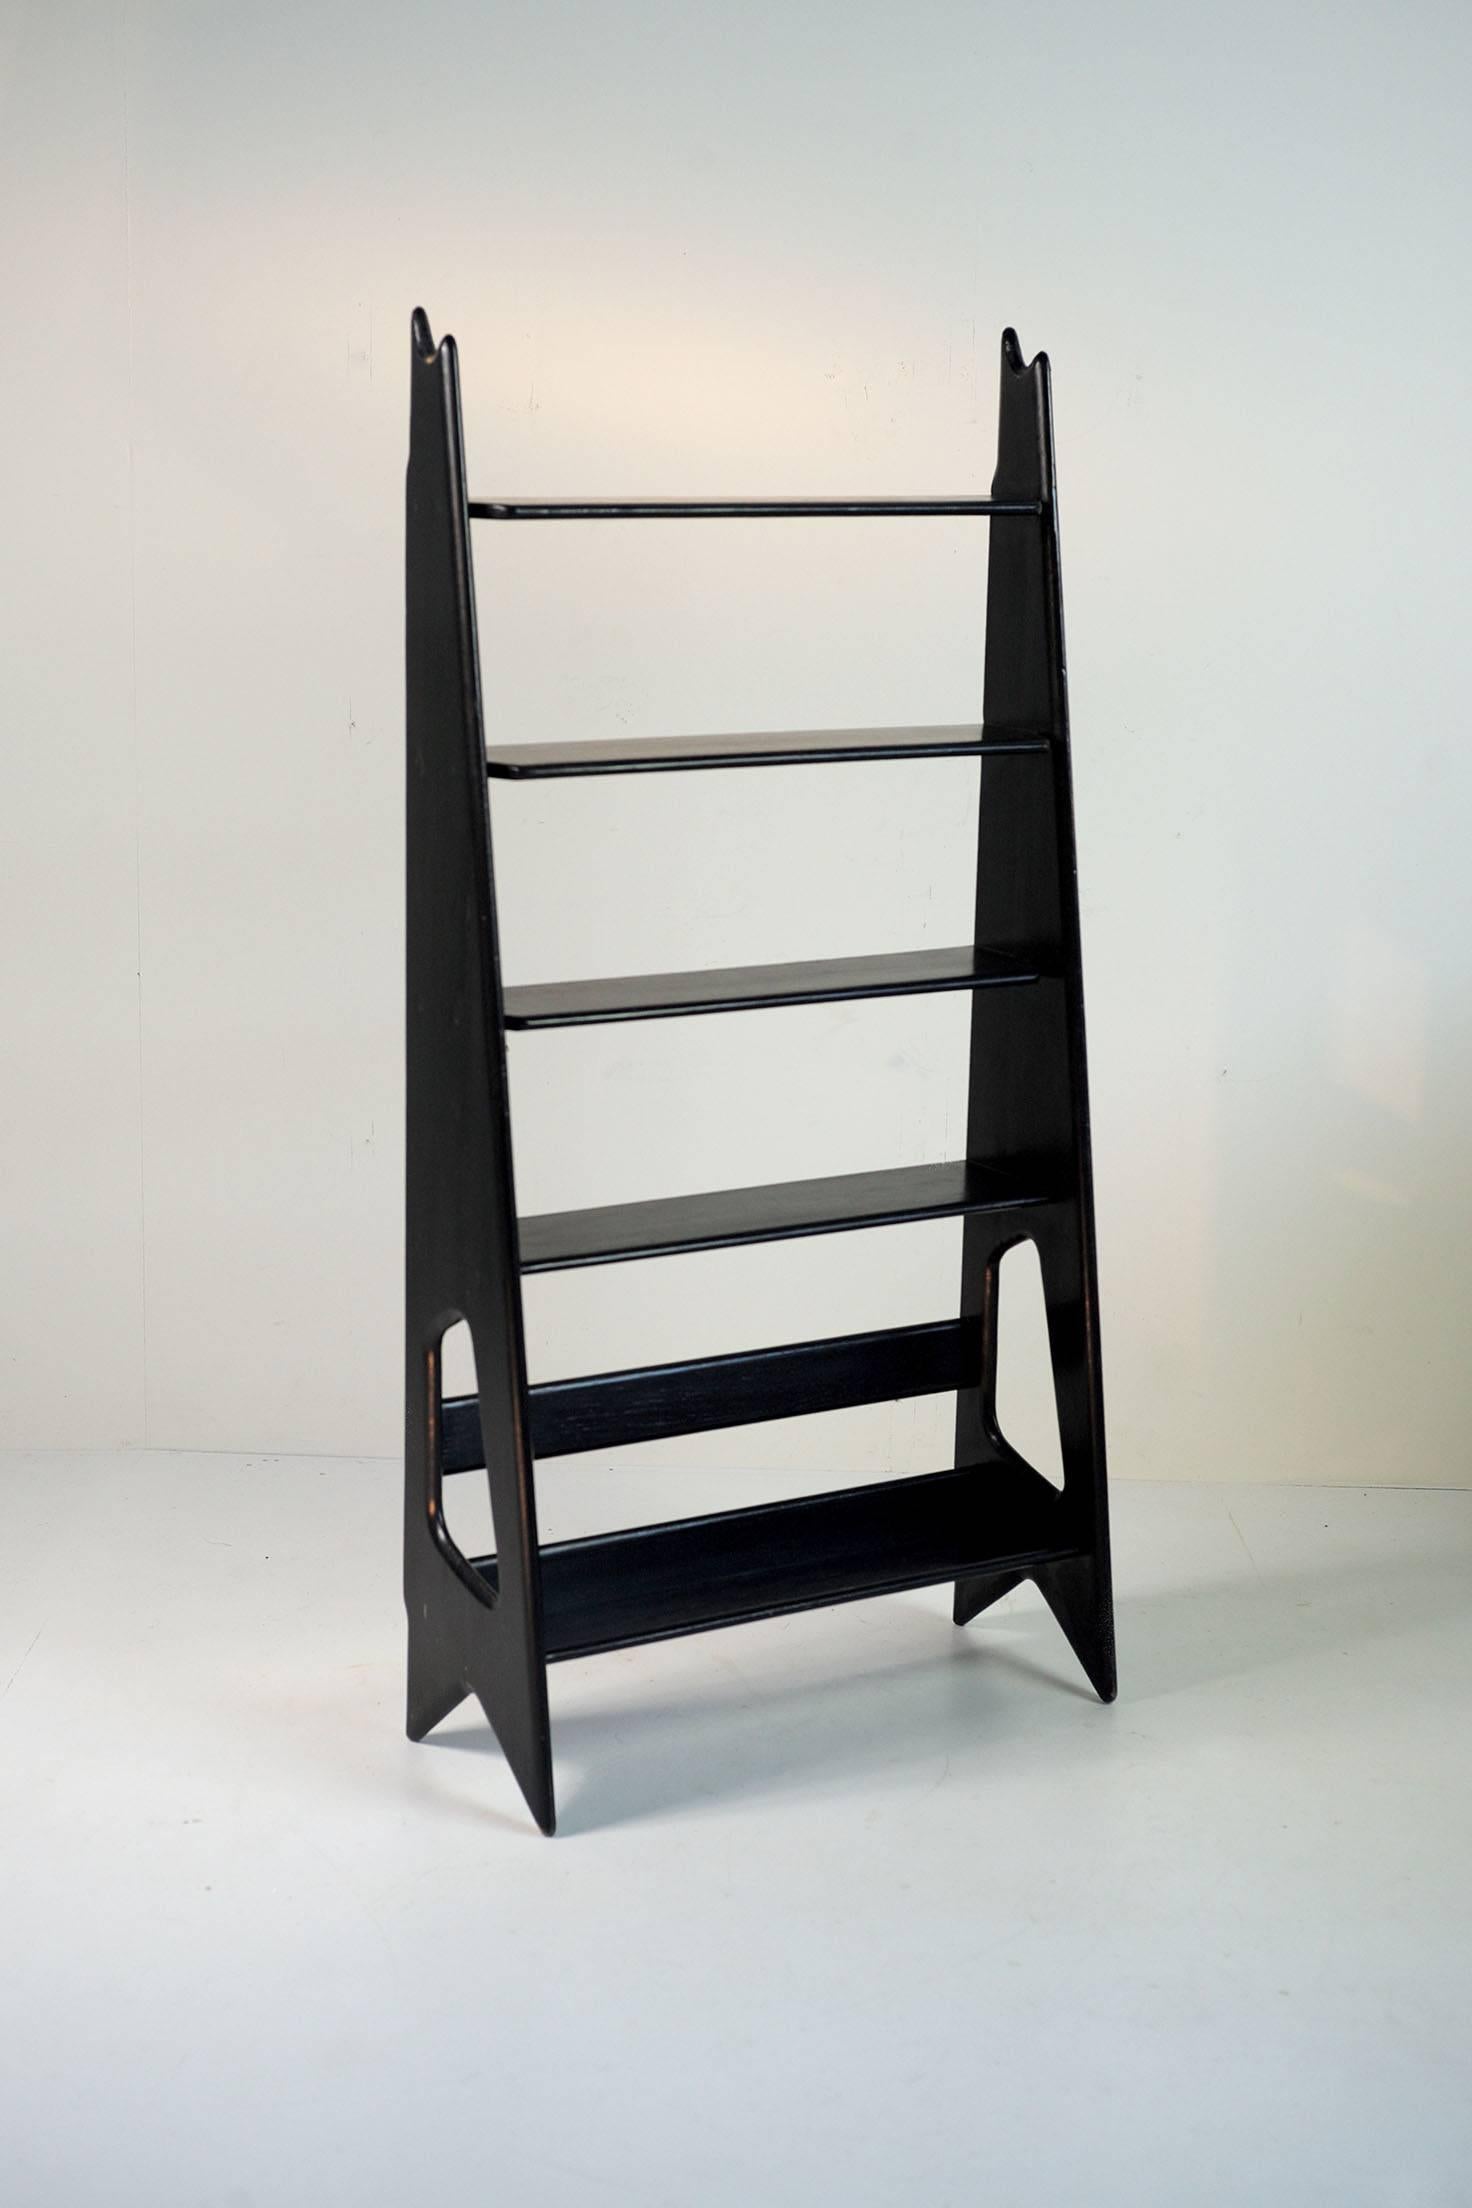 Pierre Cruège (1913-2003), blackened / waxed oak bookcase, Éditions Formes / France, 1950. 
Pupil of René Buthaud then René Prou, Pierre Cruège is an important player in the reconstruction (1945-1955). This free-form library is a very good example